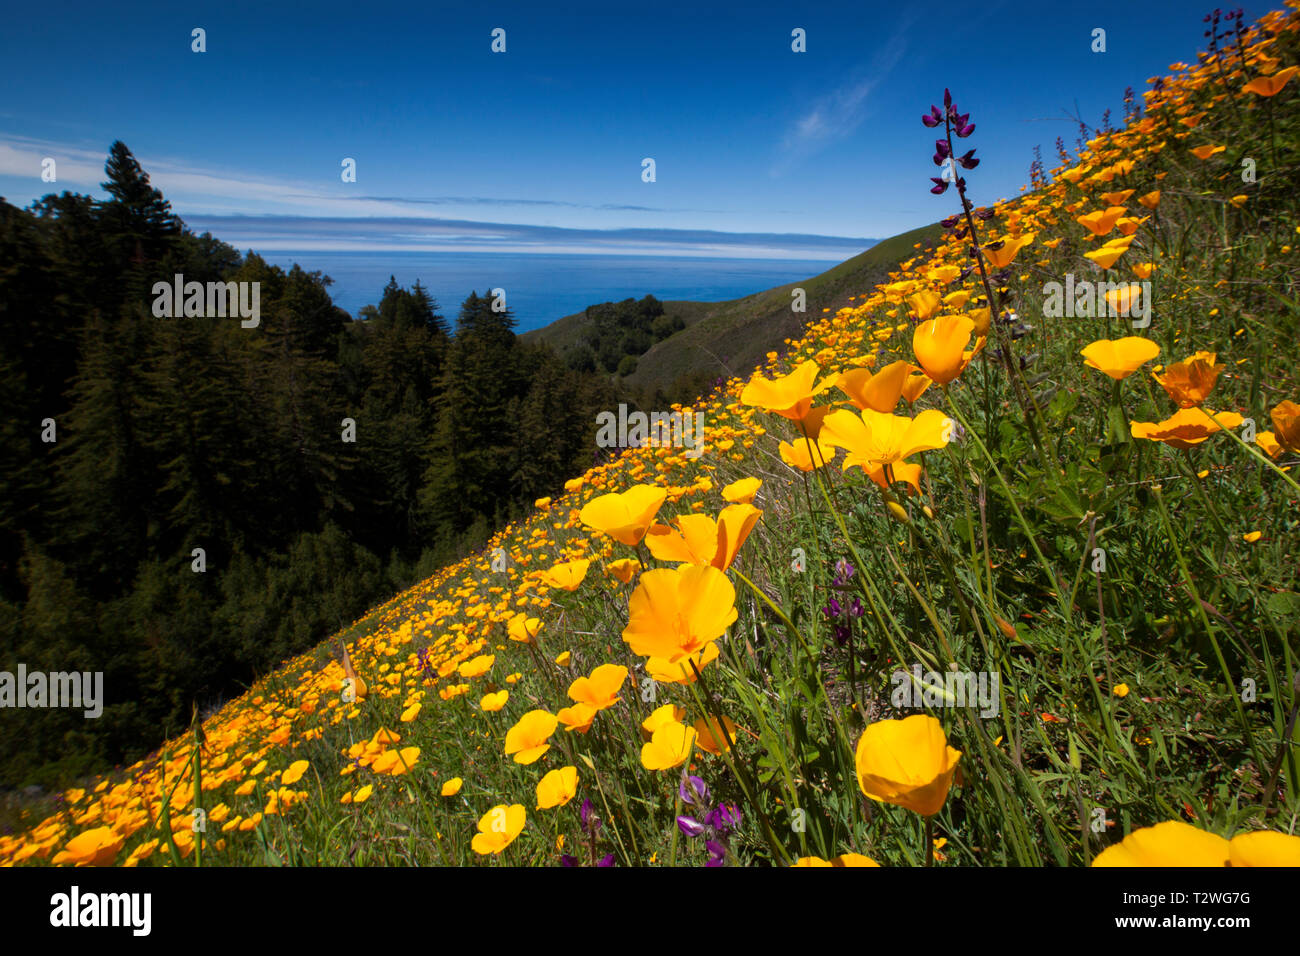 A hill of poppies in bloom on the california coast overlooking the ocean Stock Photo